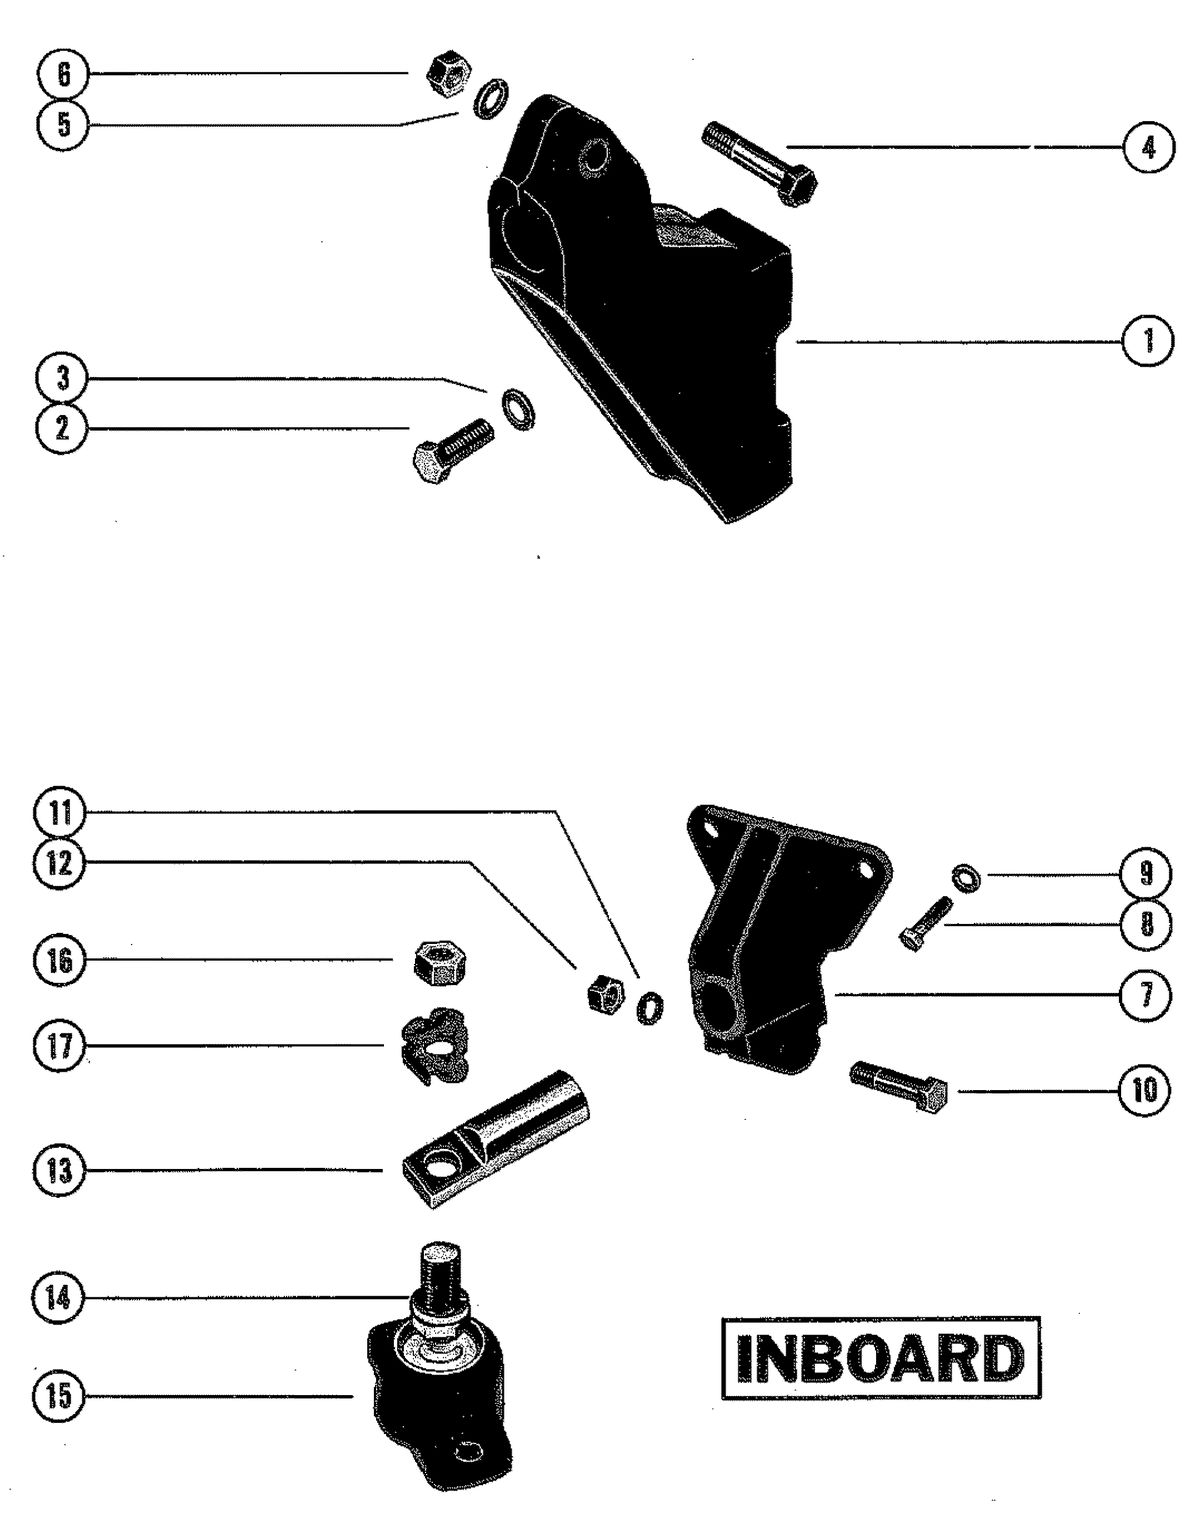 MERCRUISER 898 (STERN DRIVE) 198 (INBOARD) ENGINE TRANSMISSION AND ENGINE MOUNTING (INBOARD)